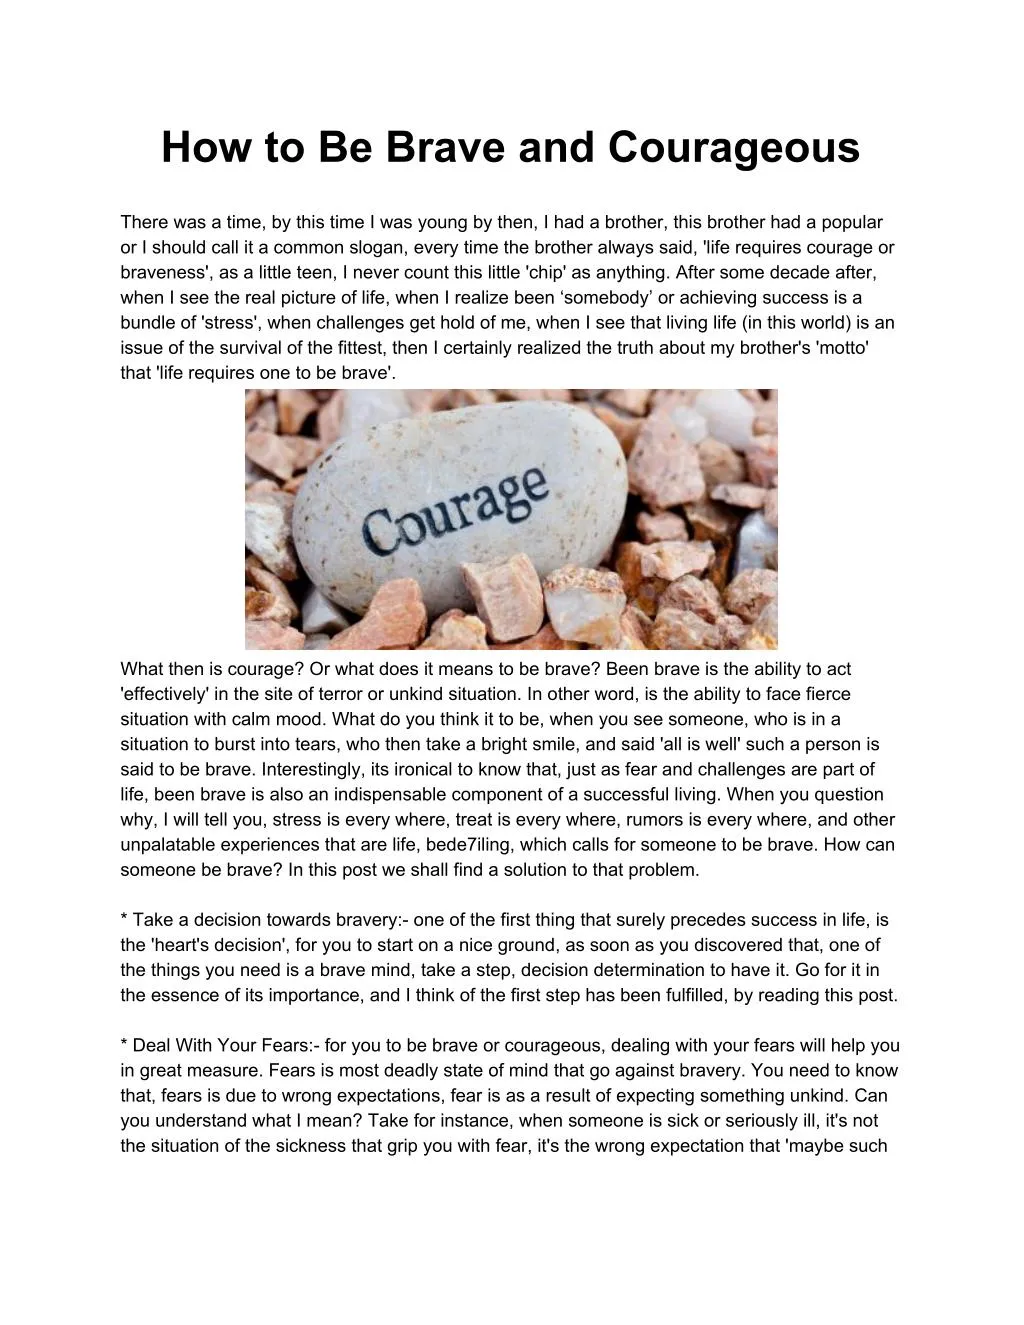 how to be brave and courageous